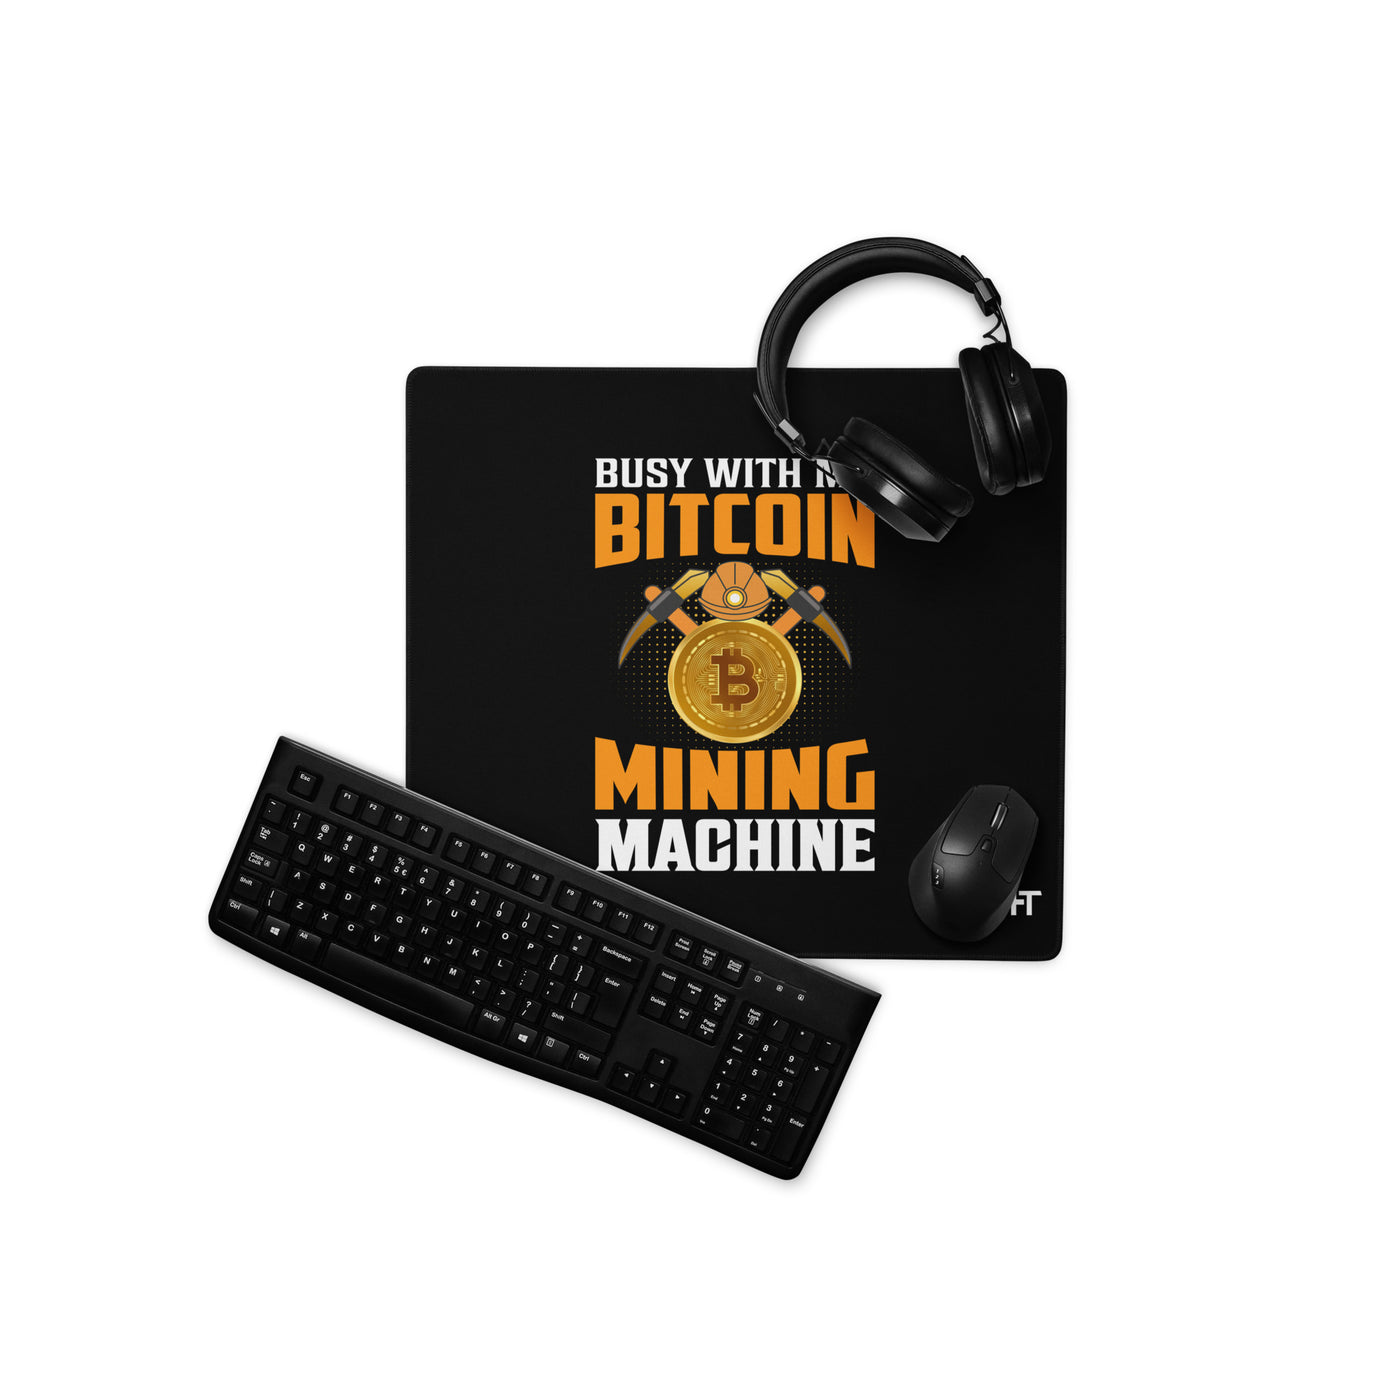 Busy with my Bitcoin Mining Machine Gaming - Mouse pad